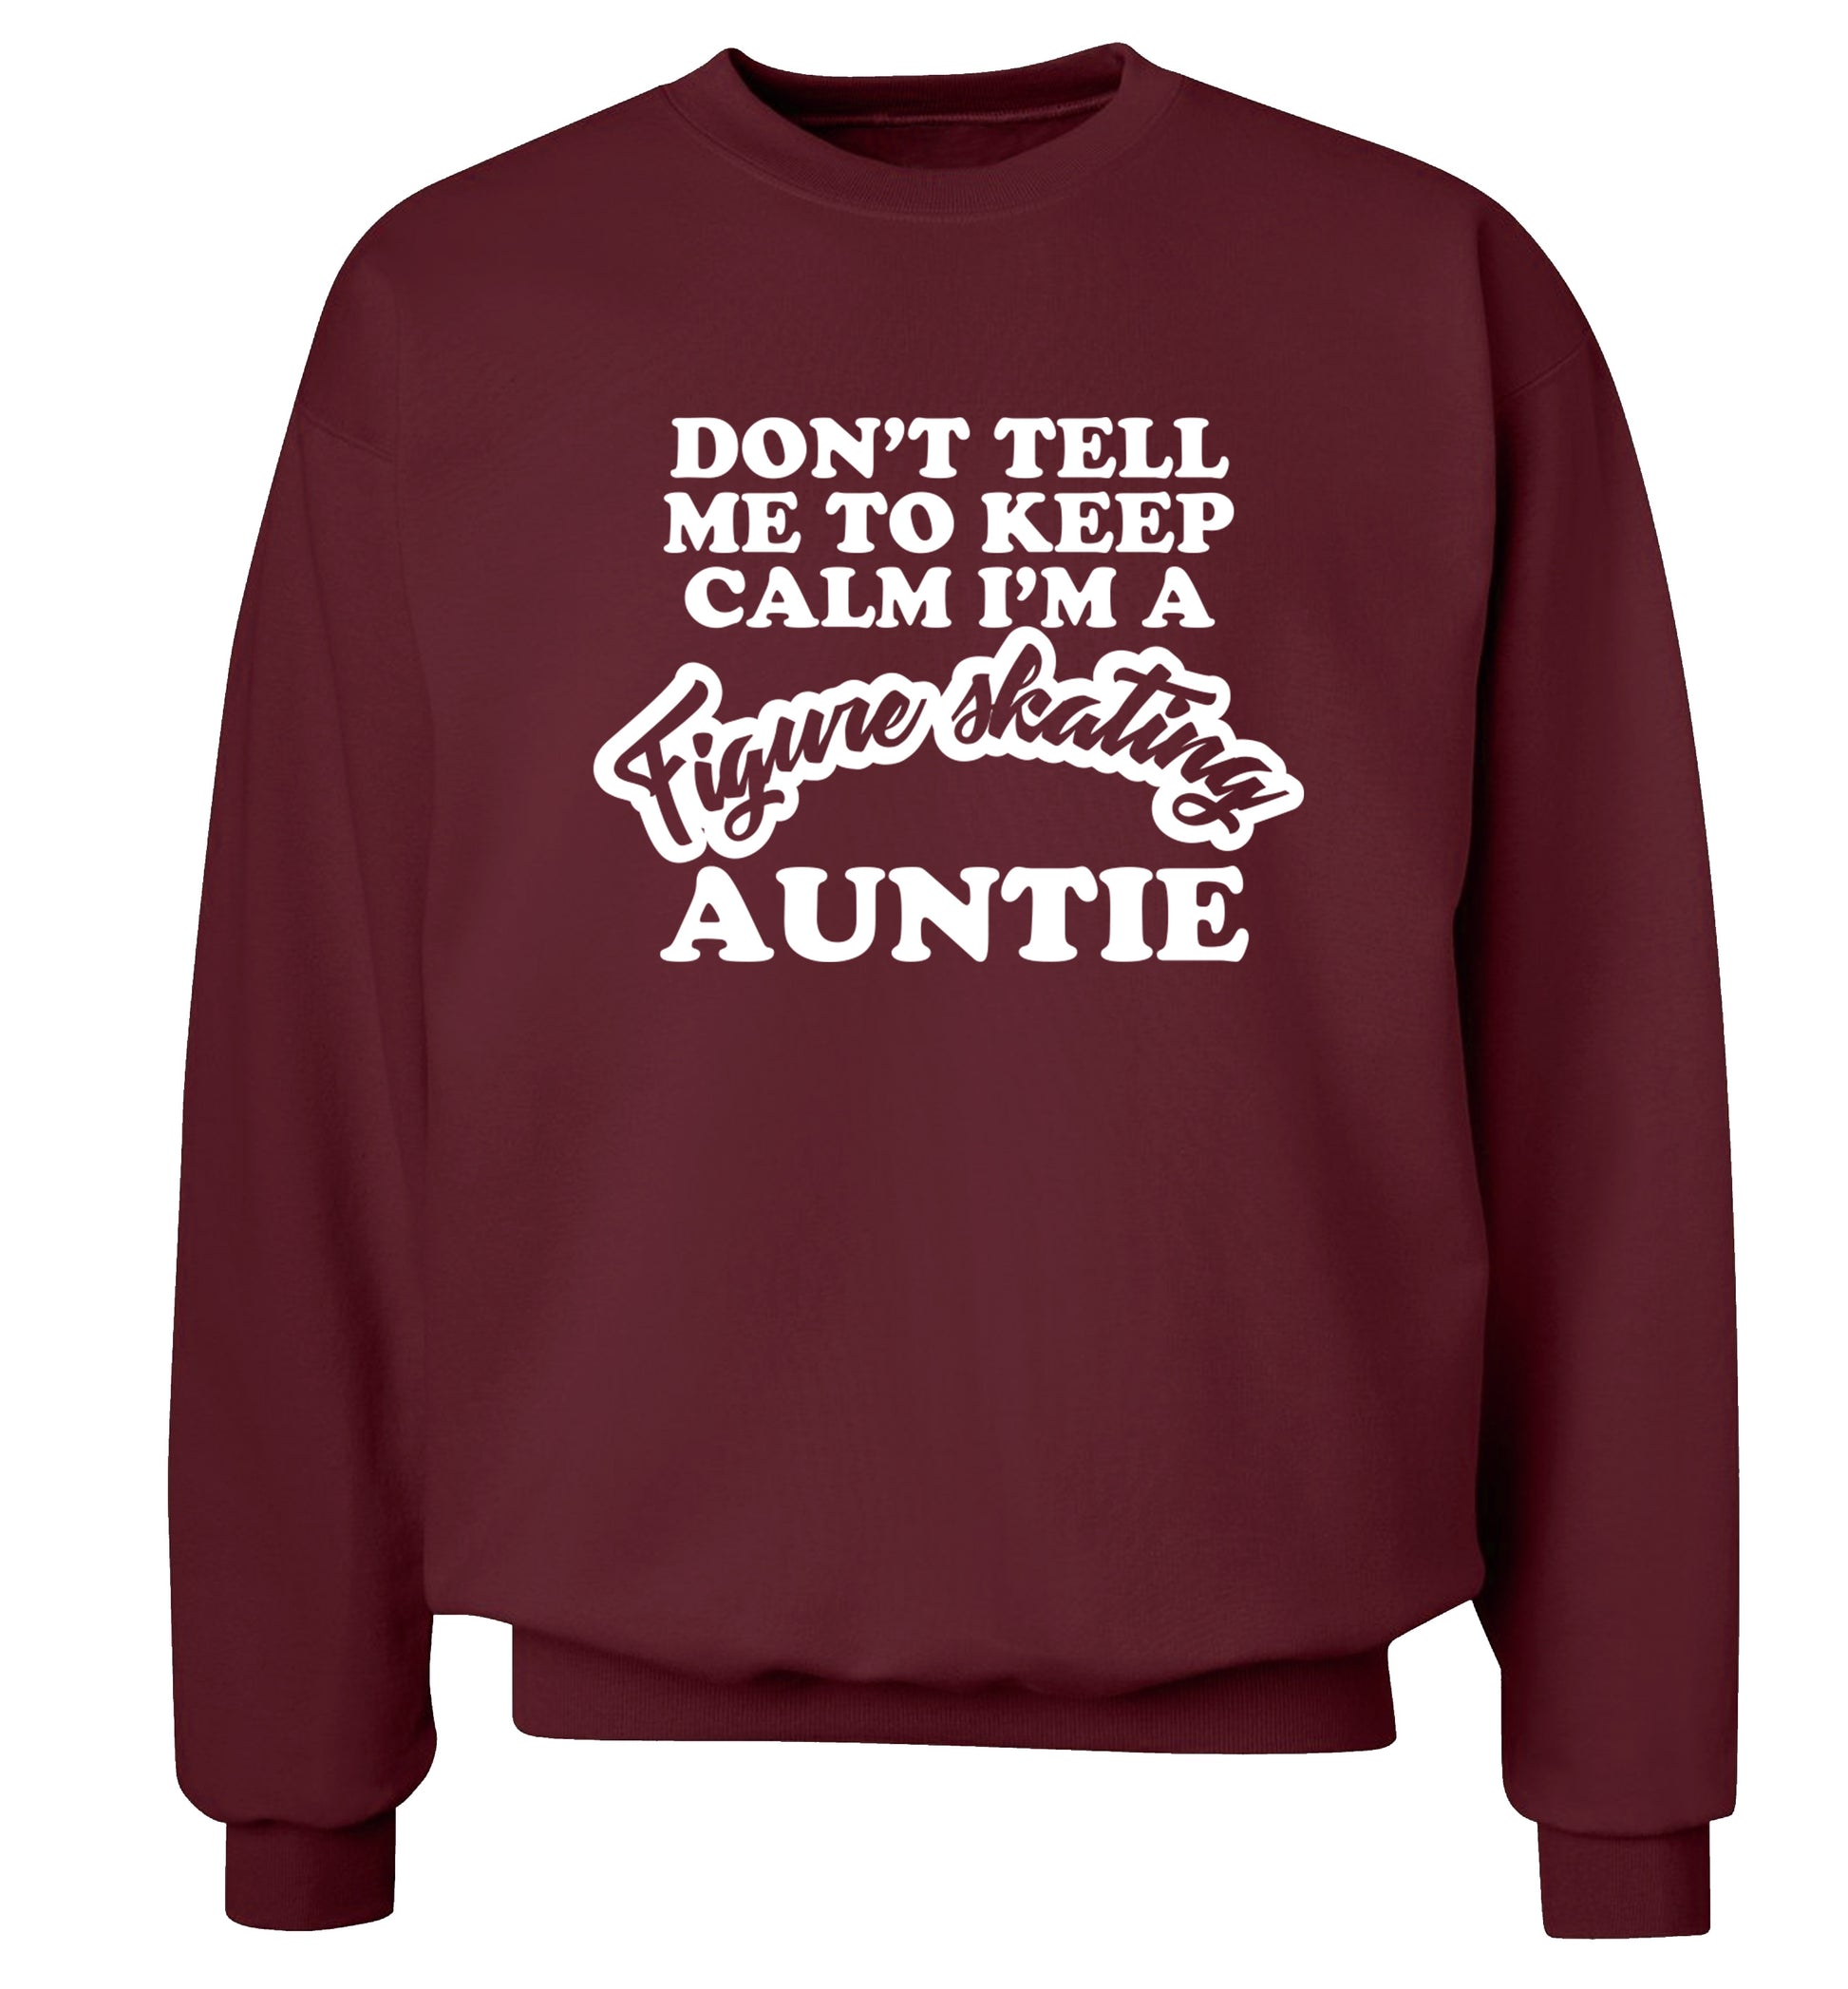 Don't tell me to keep calm I'm a figure skating auntie Adult's unisexmaroon Sweater 2XL